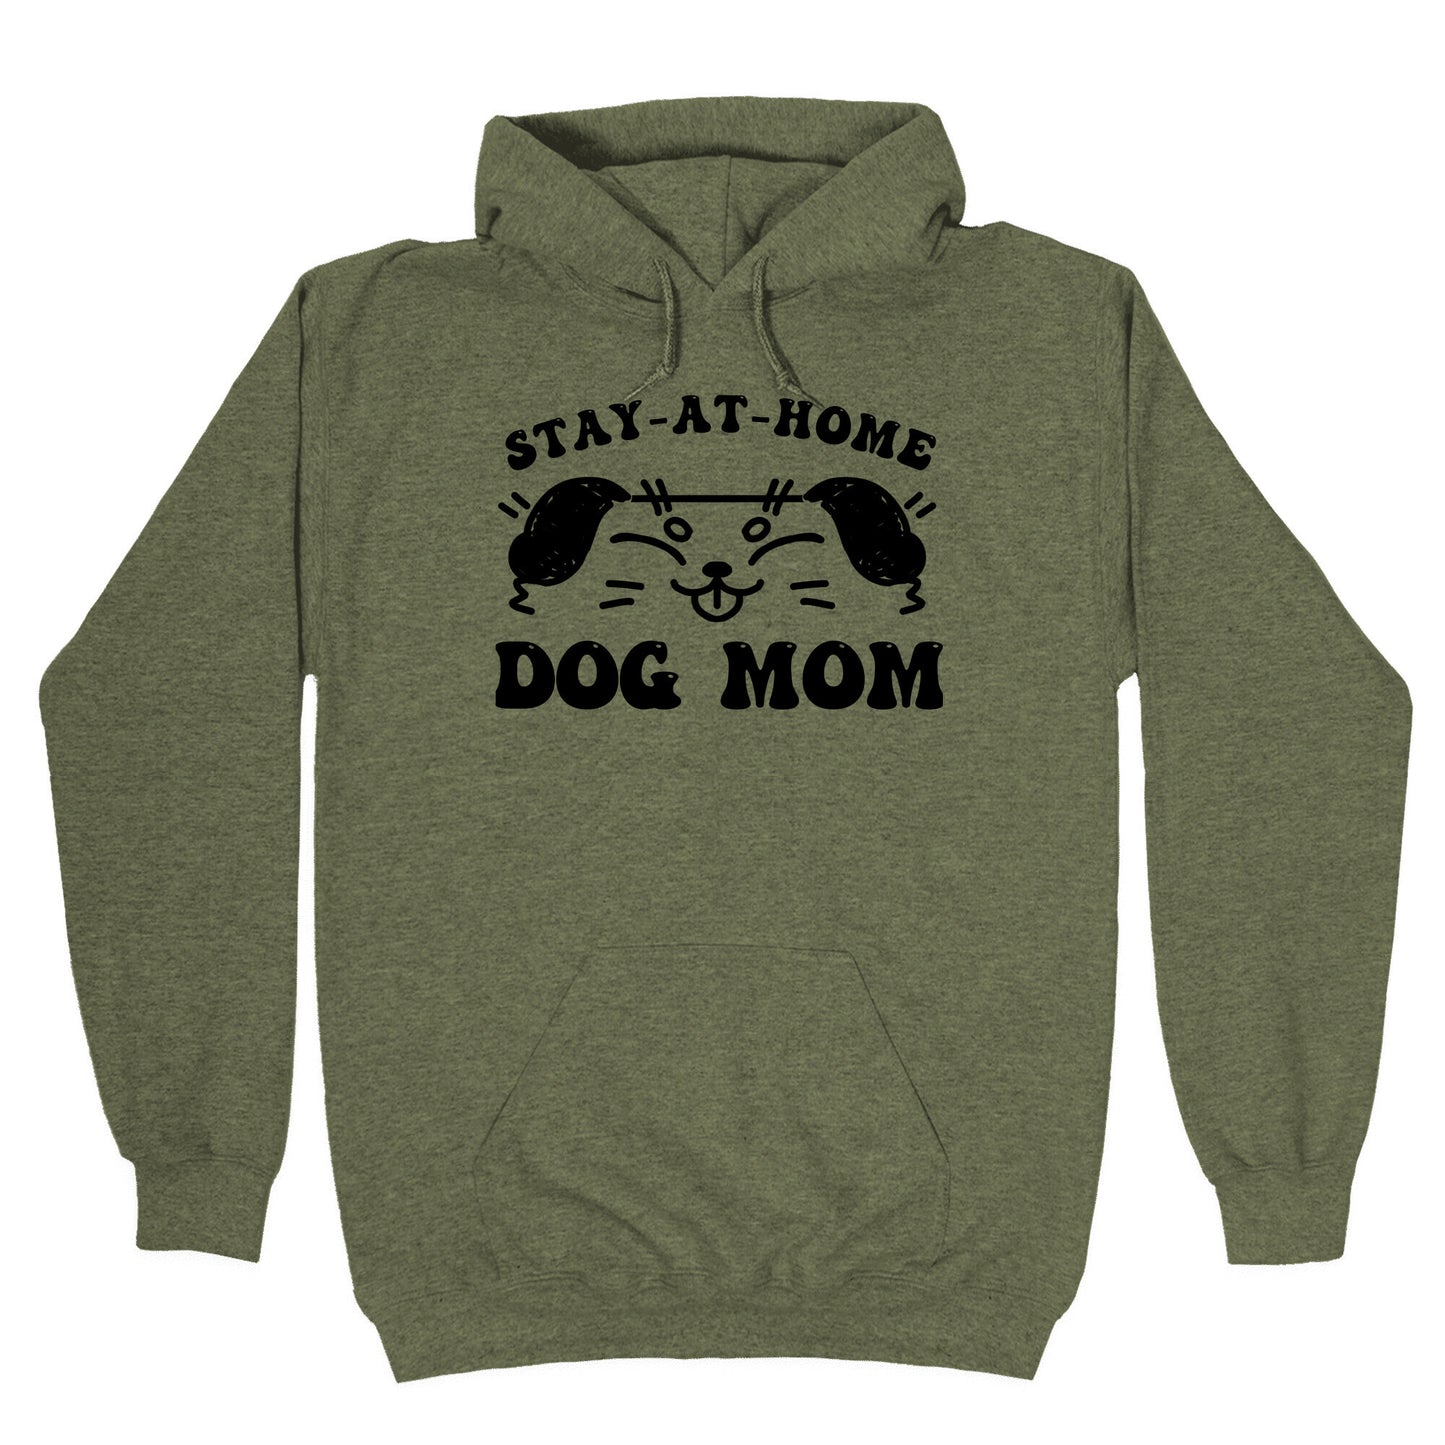 Stay At Home Dog Mom Hoodie